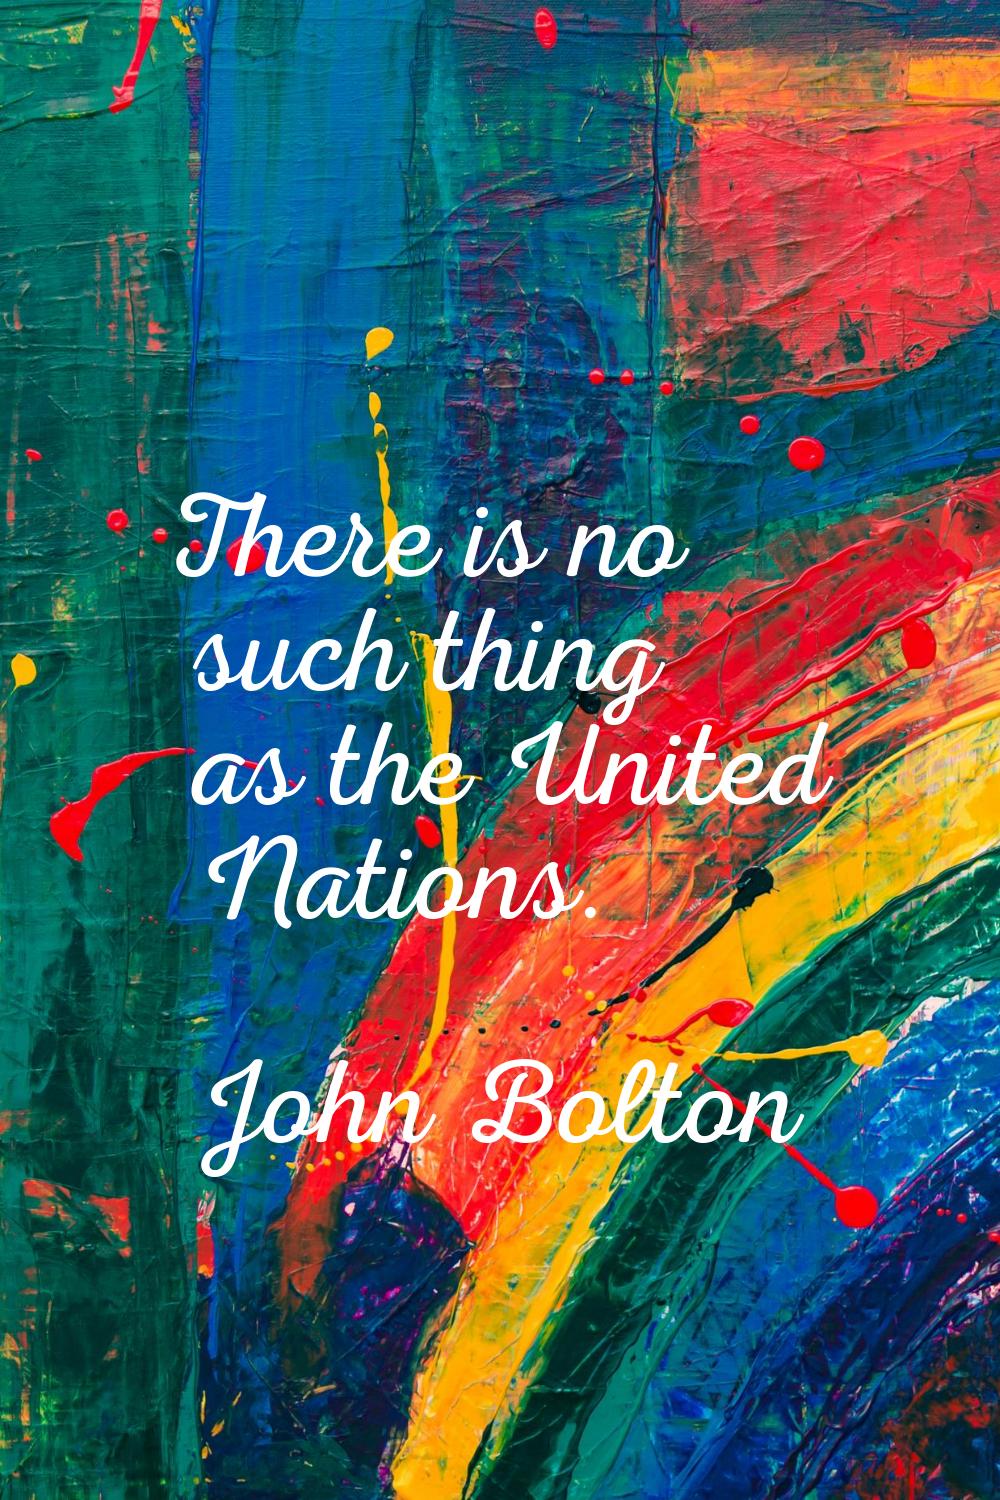 There is no such thing as the United Nations.